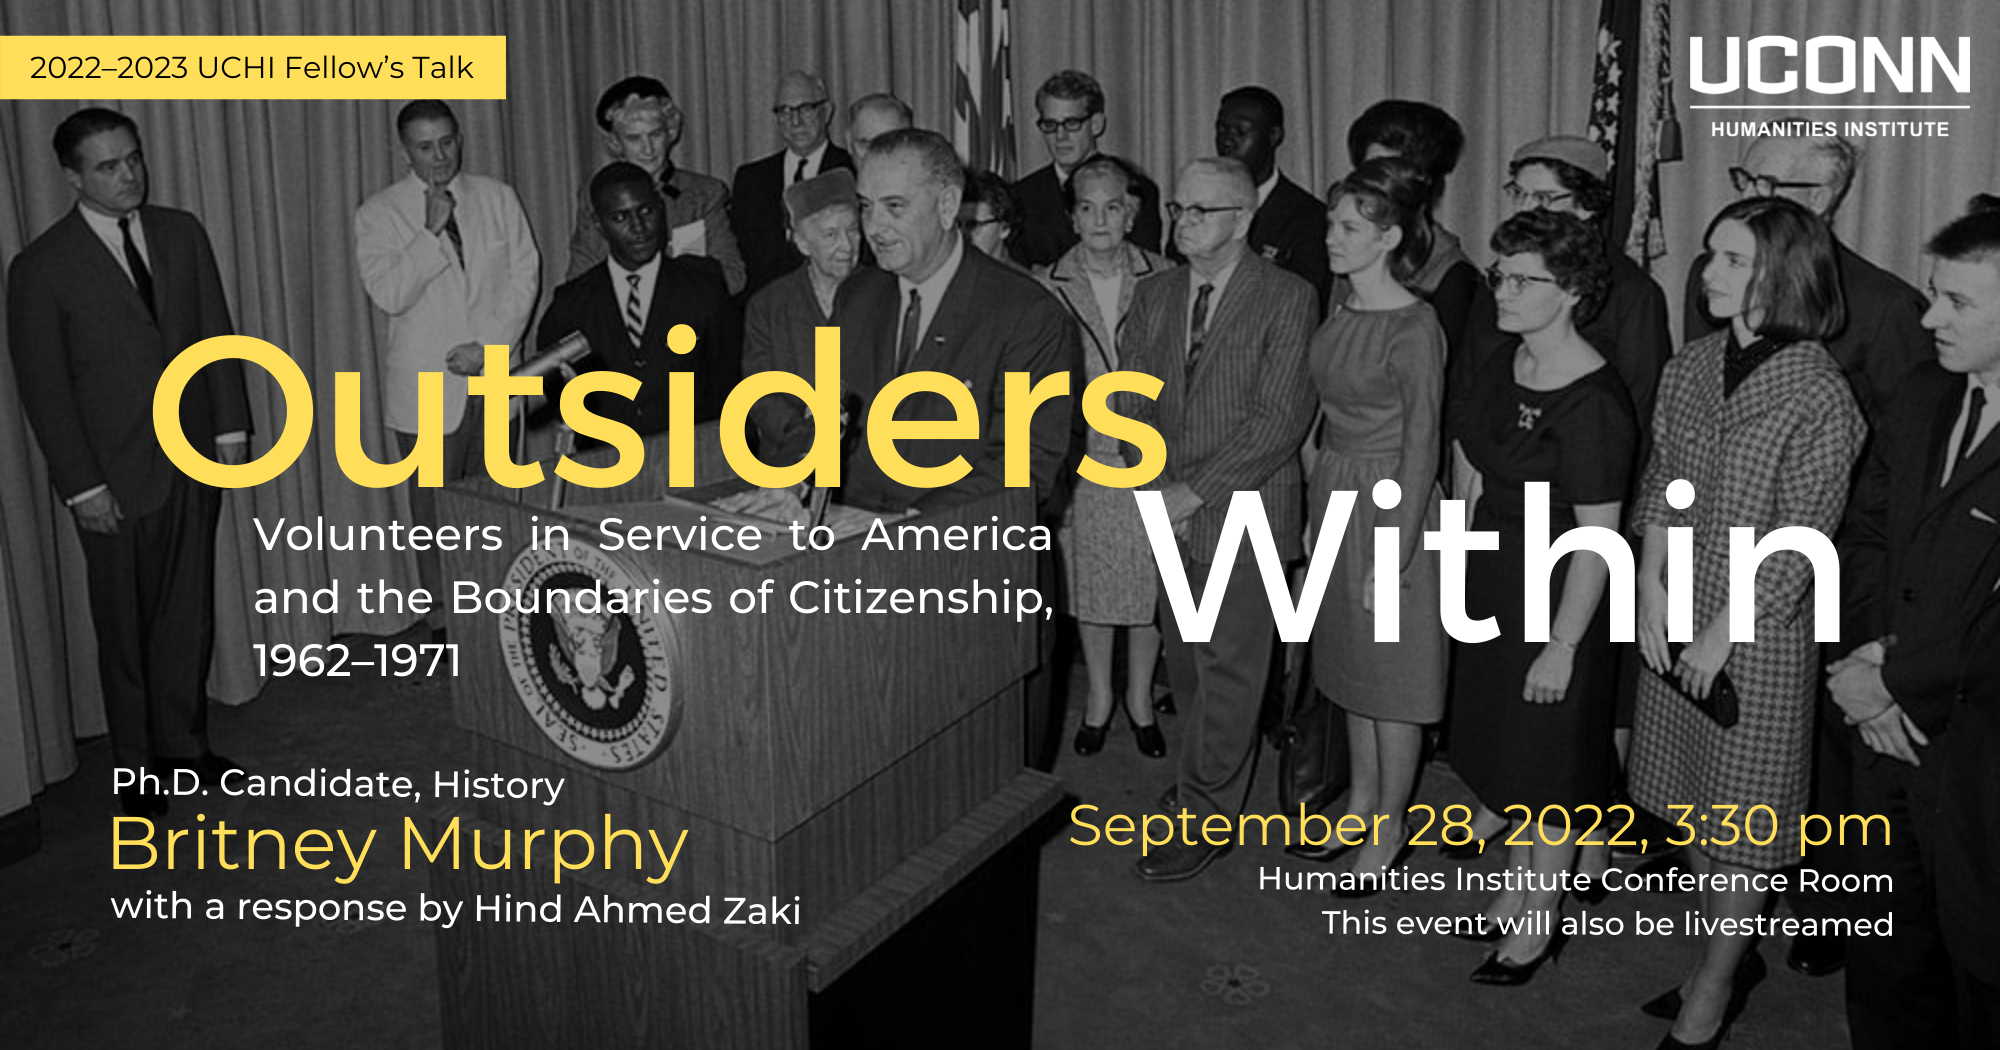 2022-23 fellow's talk. Outsiders Within: Volunteers in Service to America and the Boundaries of Citizenship 1962–1971. PhD Candidate History, Britney Murphy, with a response by Hind Ahmed Zaki. September 28, 2022, 3:30 pm, in the humanities institute conference room. This event will also be livestreamed.